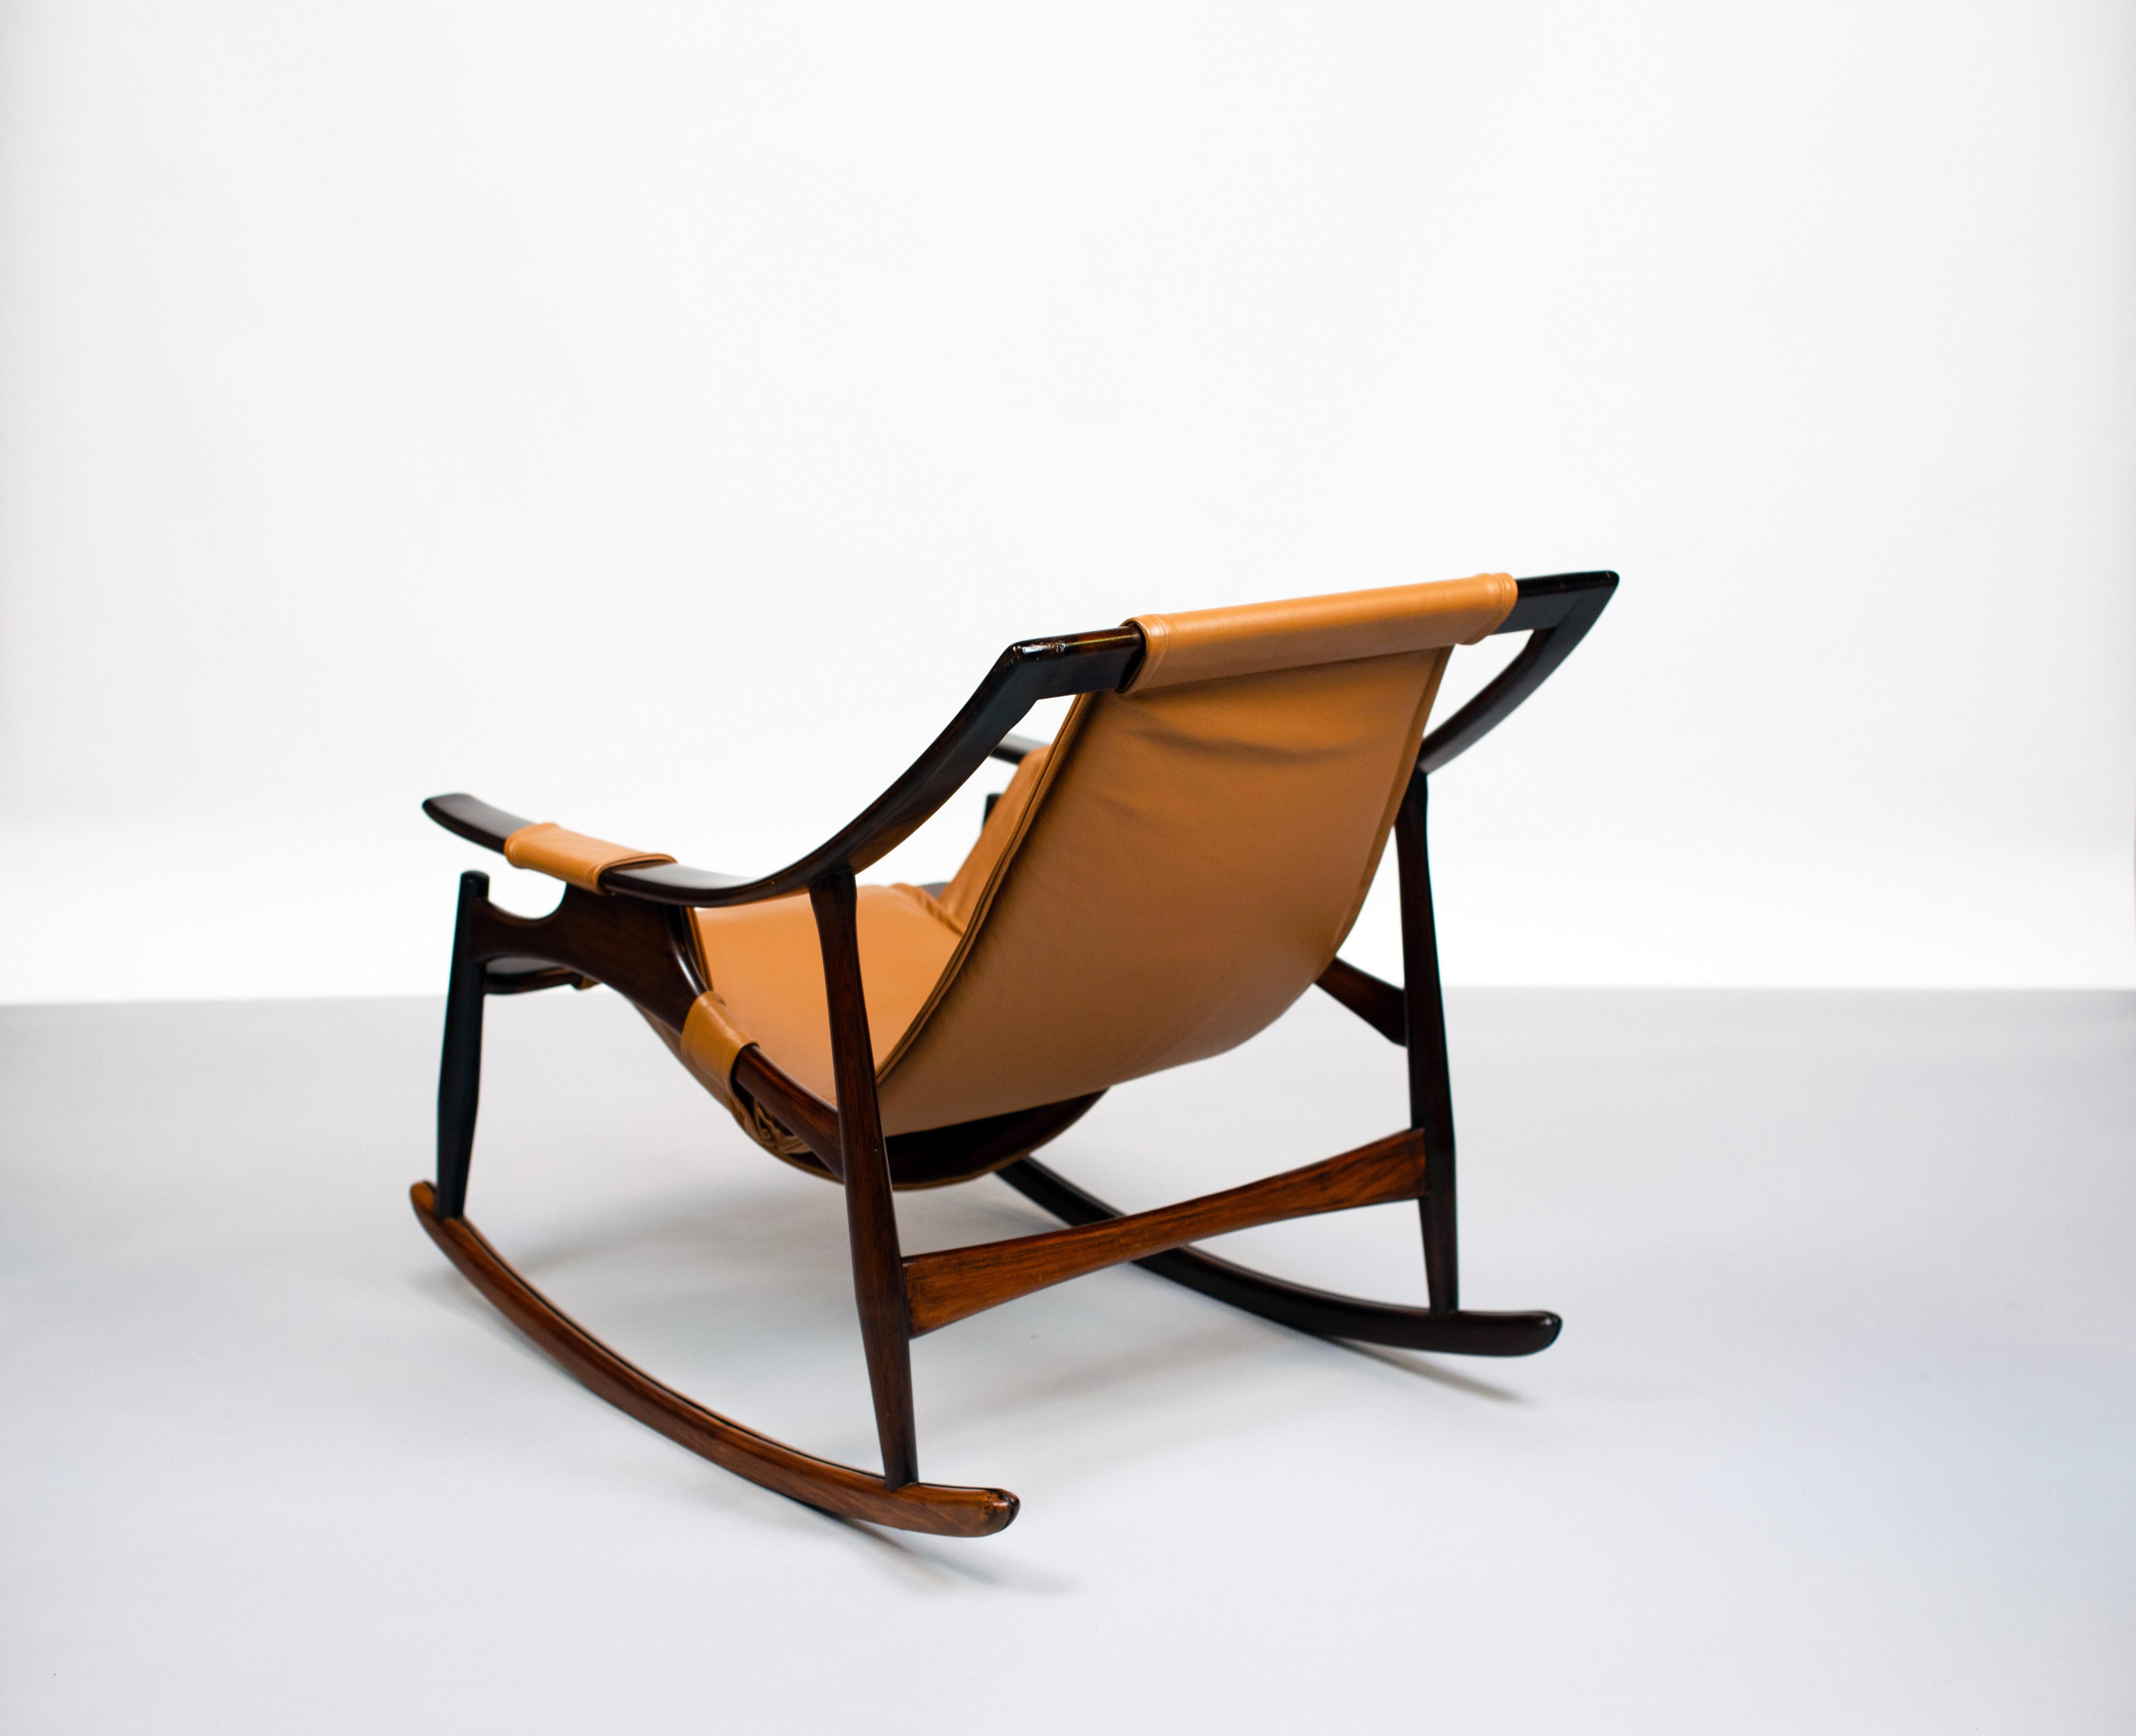 This rocking chair model is a classic piece from the Liceu de Artes e Oficios workshop. Its modern lines are clean and dynamic, the recognizable curve of the armrests emphasizing the movement of the rocking model. The structure is made of solid wood